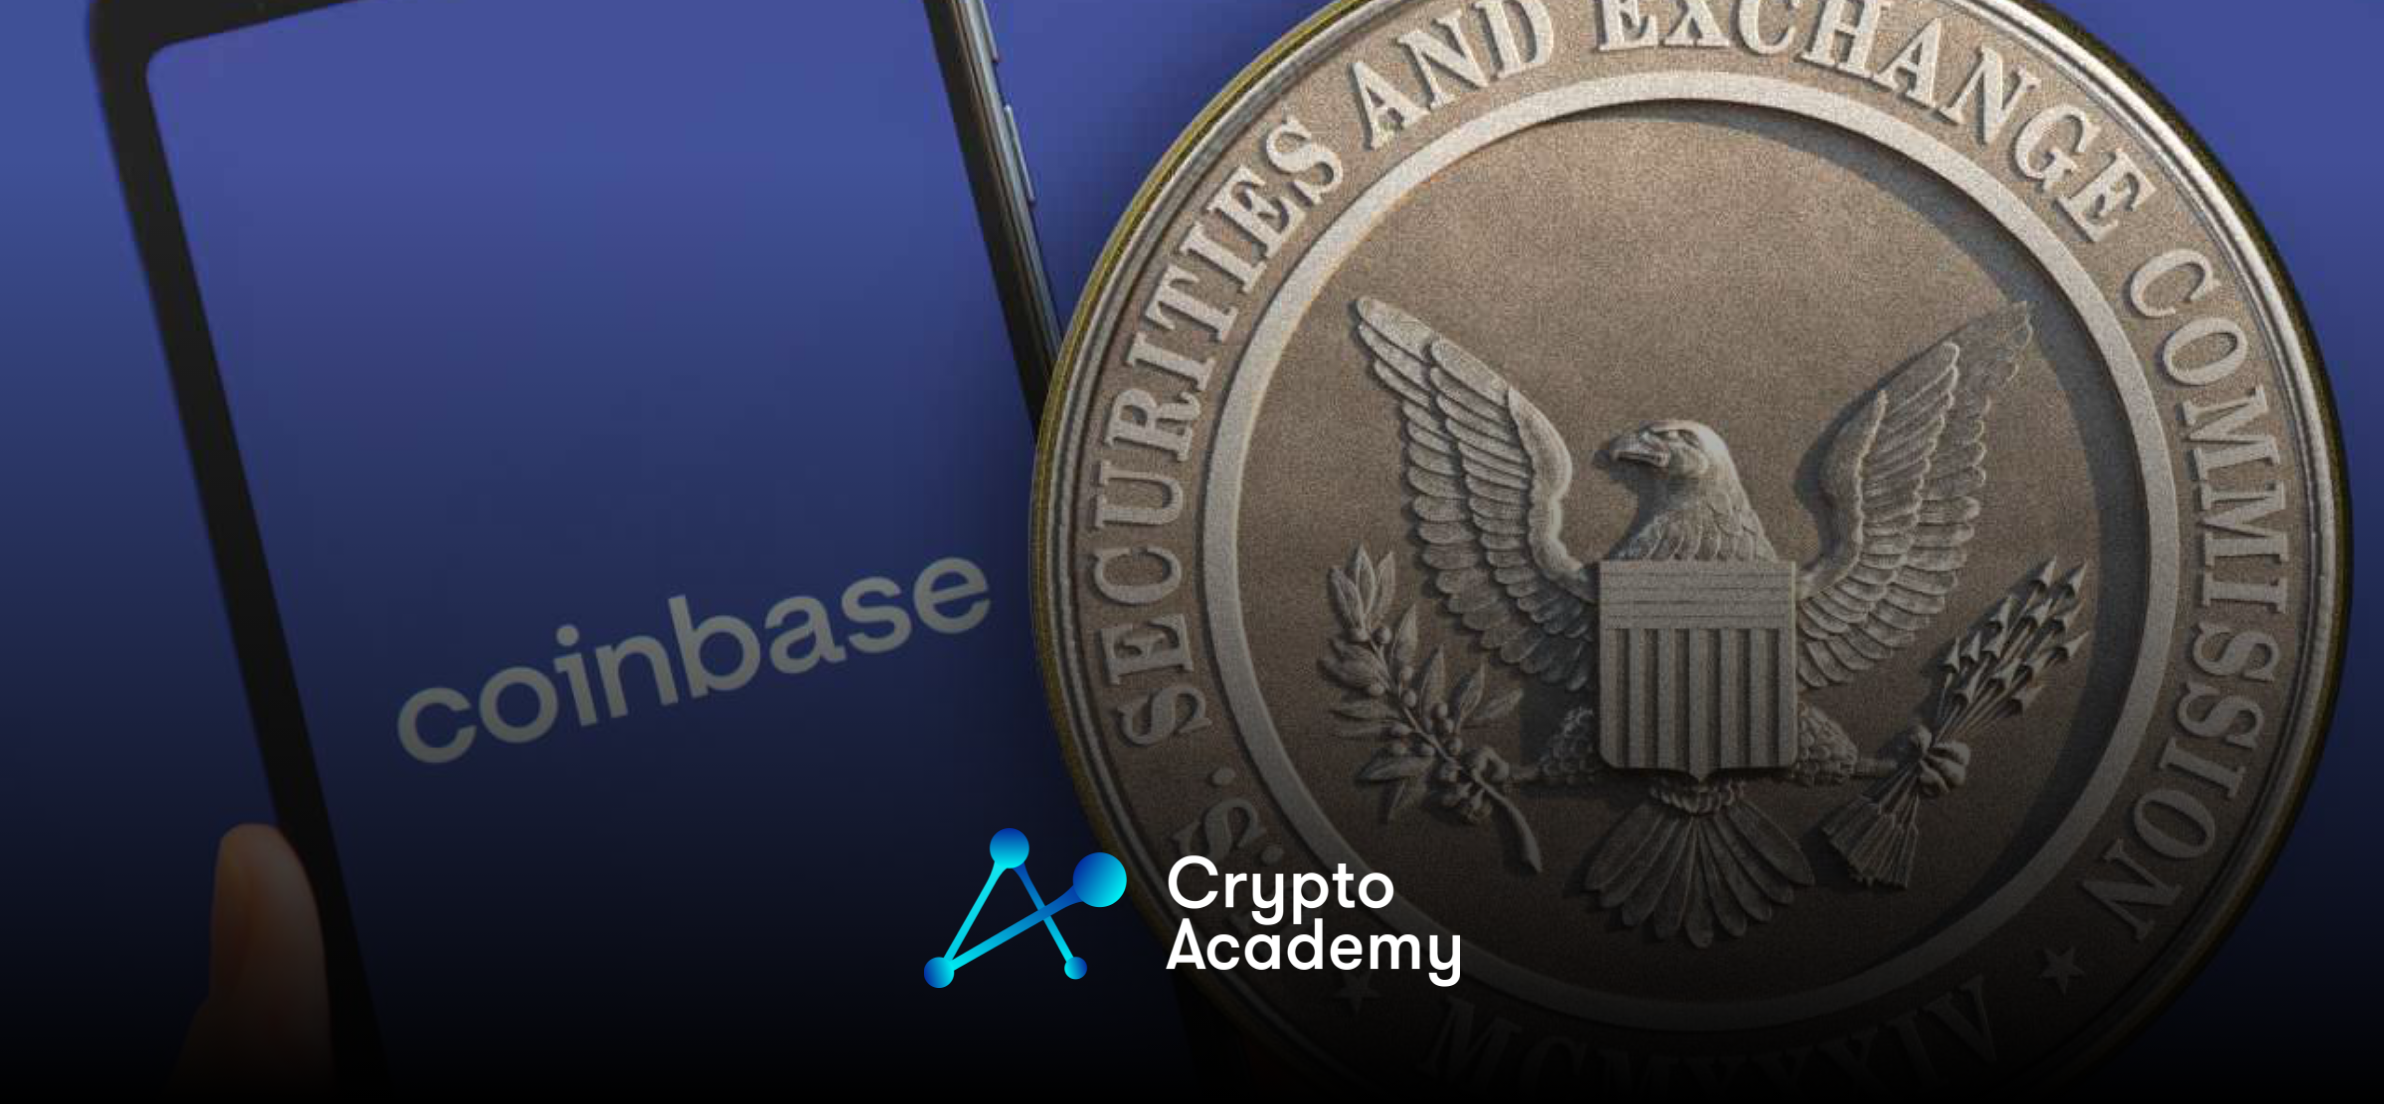 SEC Concerned About Coinbase’s Deal With Celsius